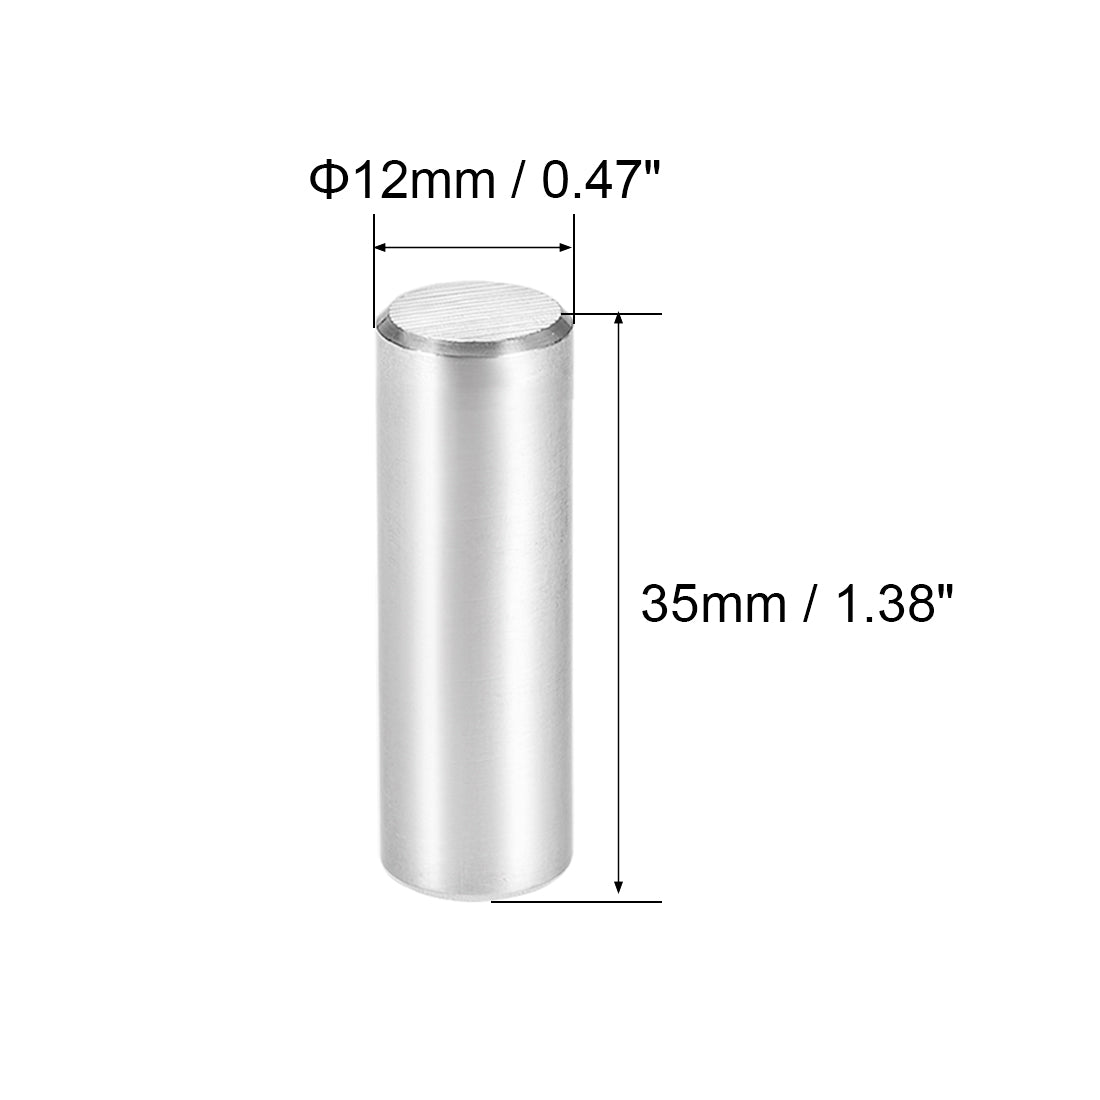 uxcell Uxcell Dowel Pin 304 Stainless Steel Cylindrical Shelf Support Pin